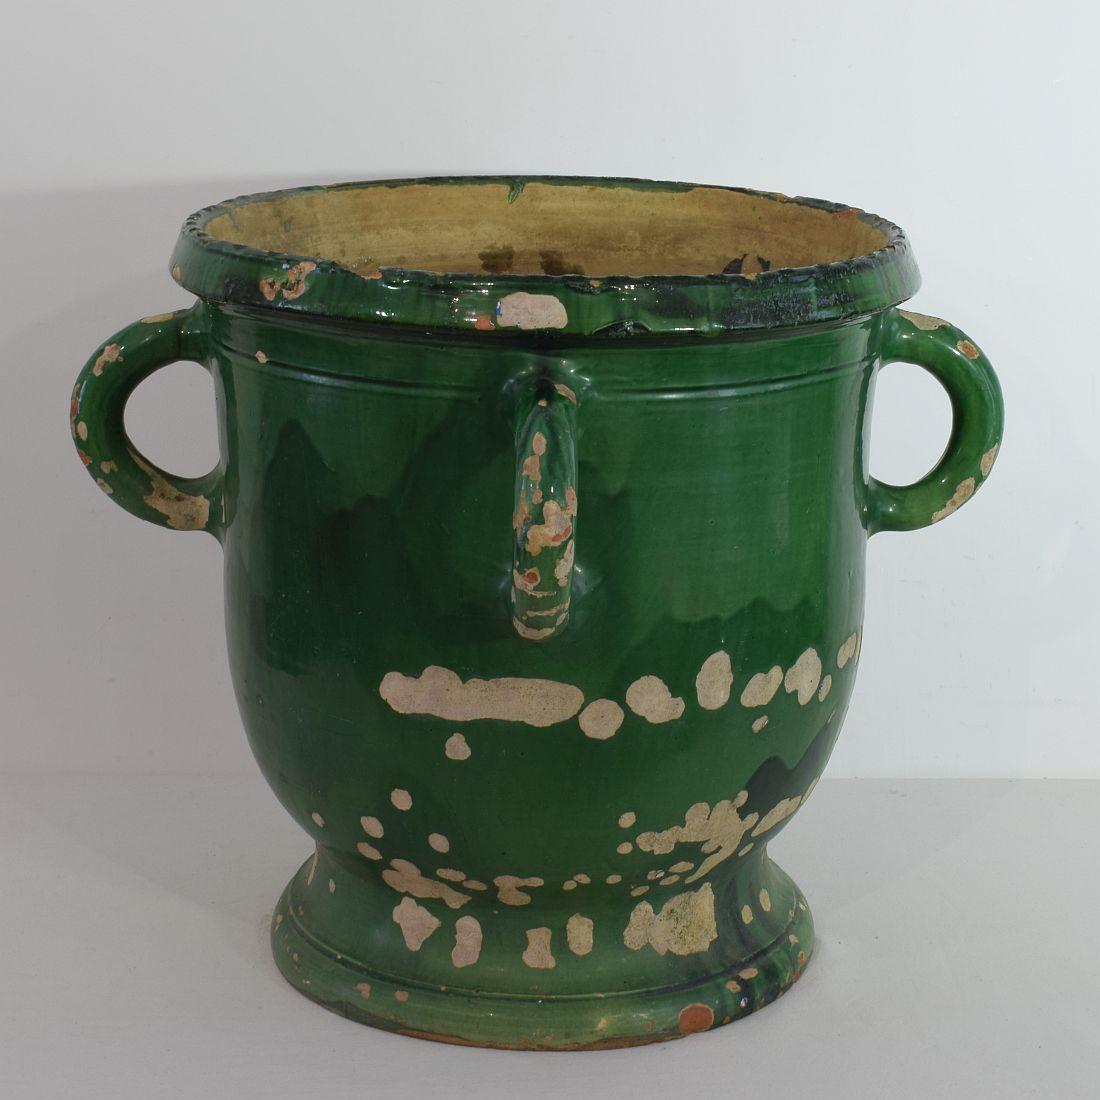 Beautiful large glazed earthenware Castelnaudary planter, France, circa 1850-1900, weathered, small losses.